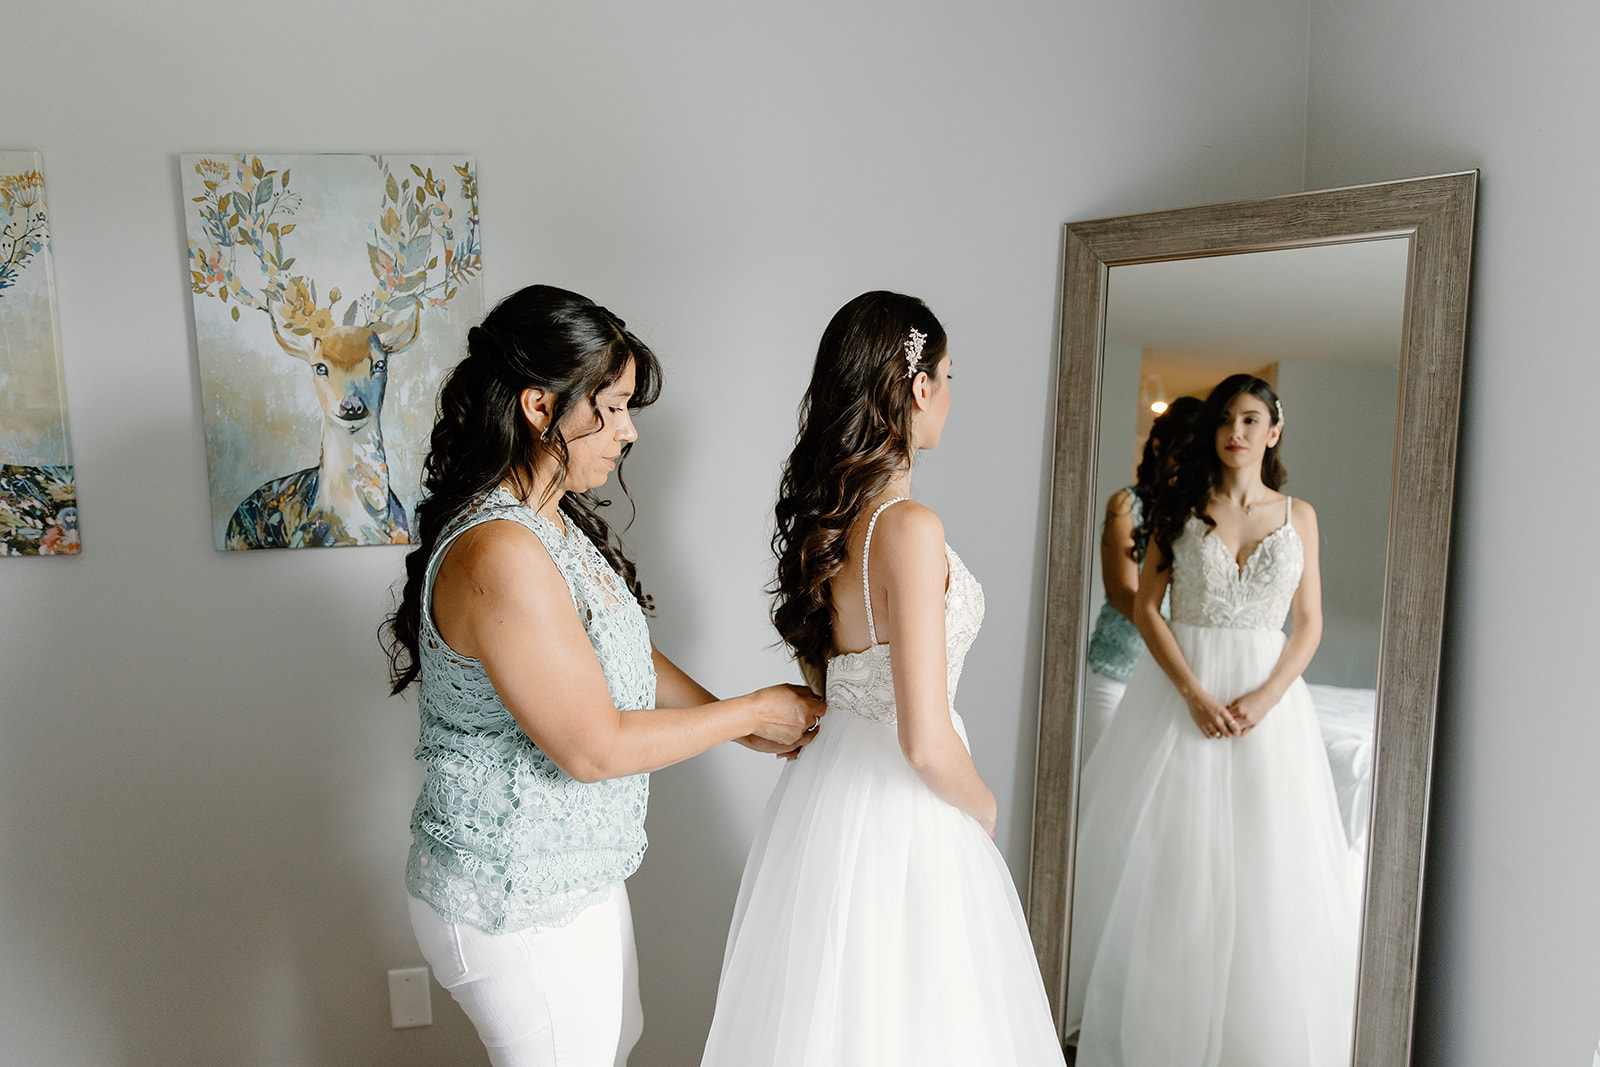 Mother zips her daughter's wedding dress in front of a mirror